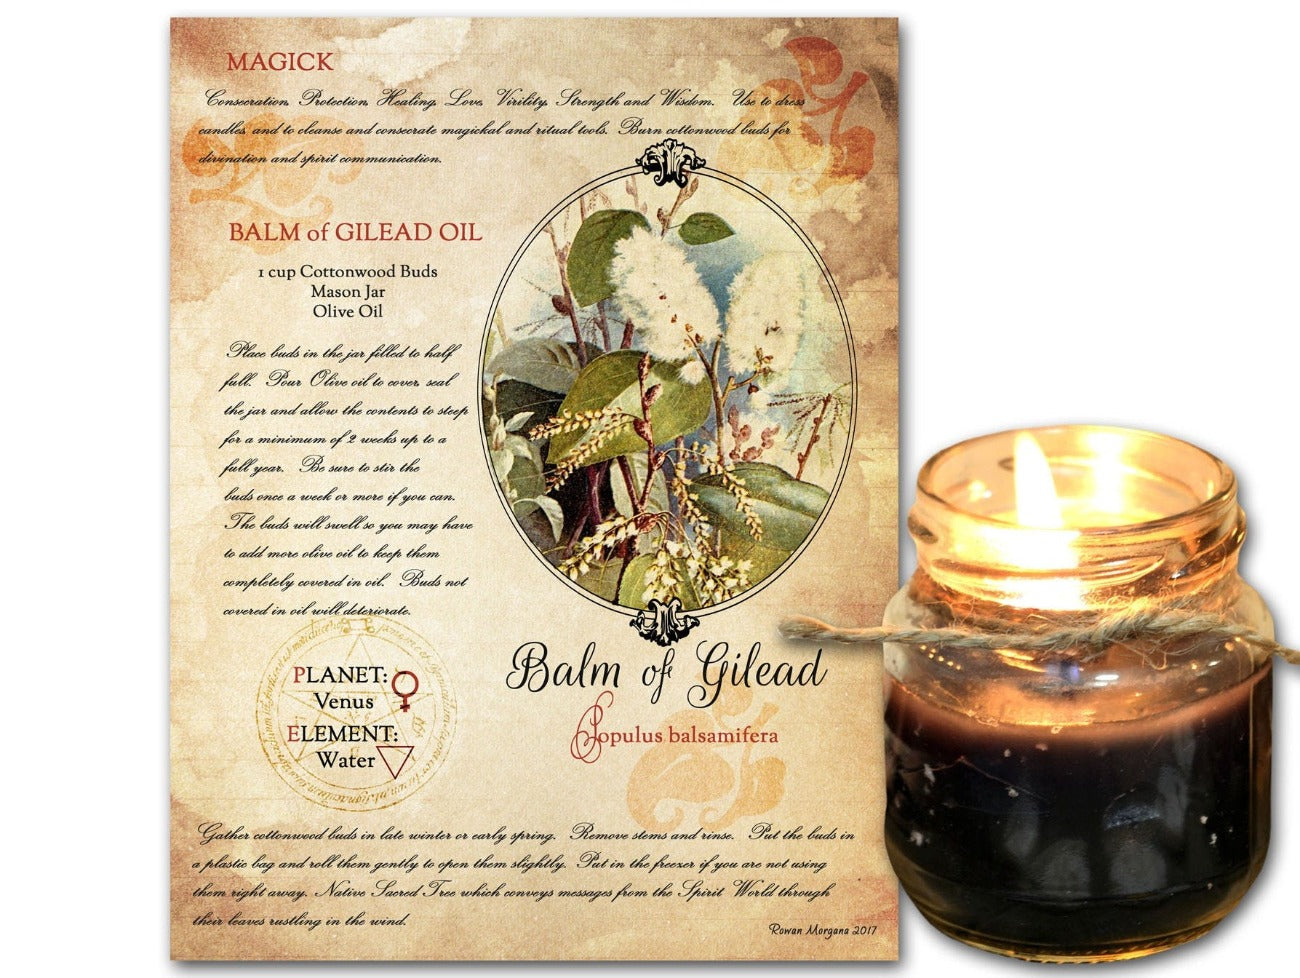 BALM of GILEAD, Digital Download, Recipe and How to Use, Cottonwood Magic, Herbal Tree Remedy, Witch Healing Oil, Tree Aromatic Oil Potion - Morgana Magick Spell